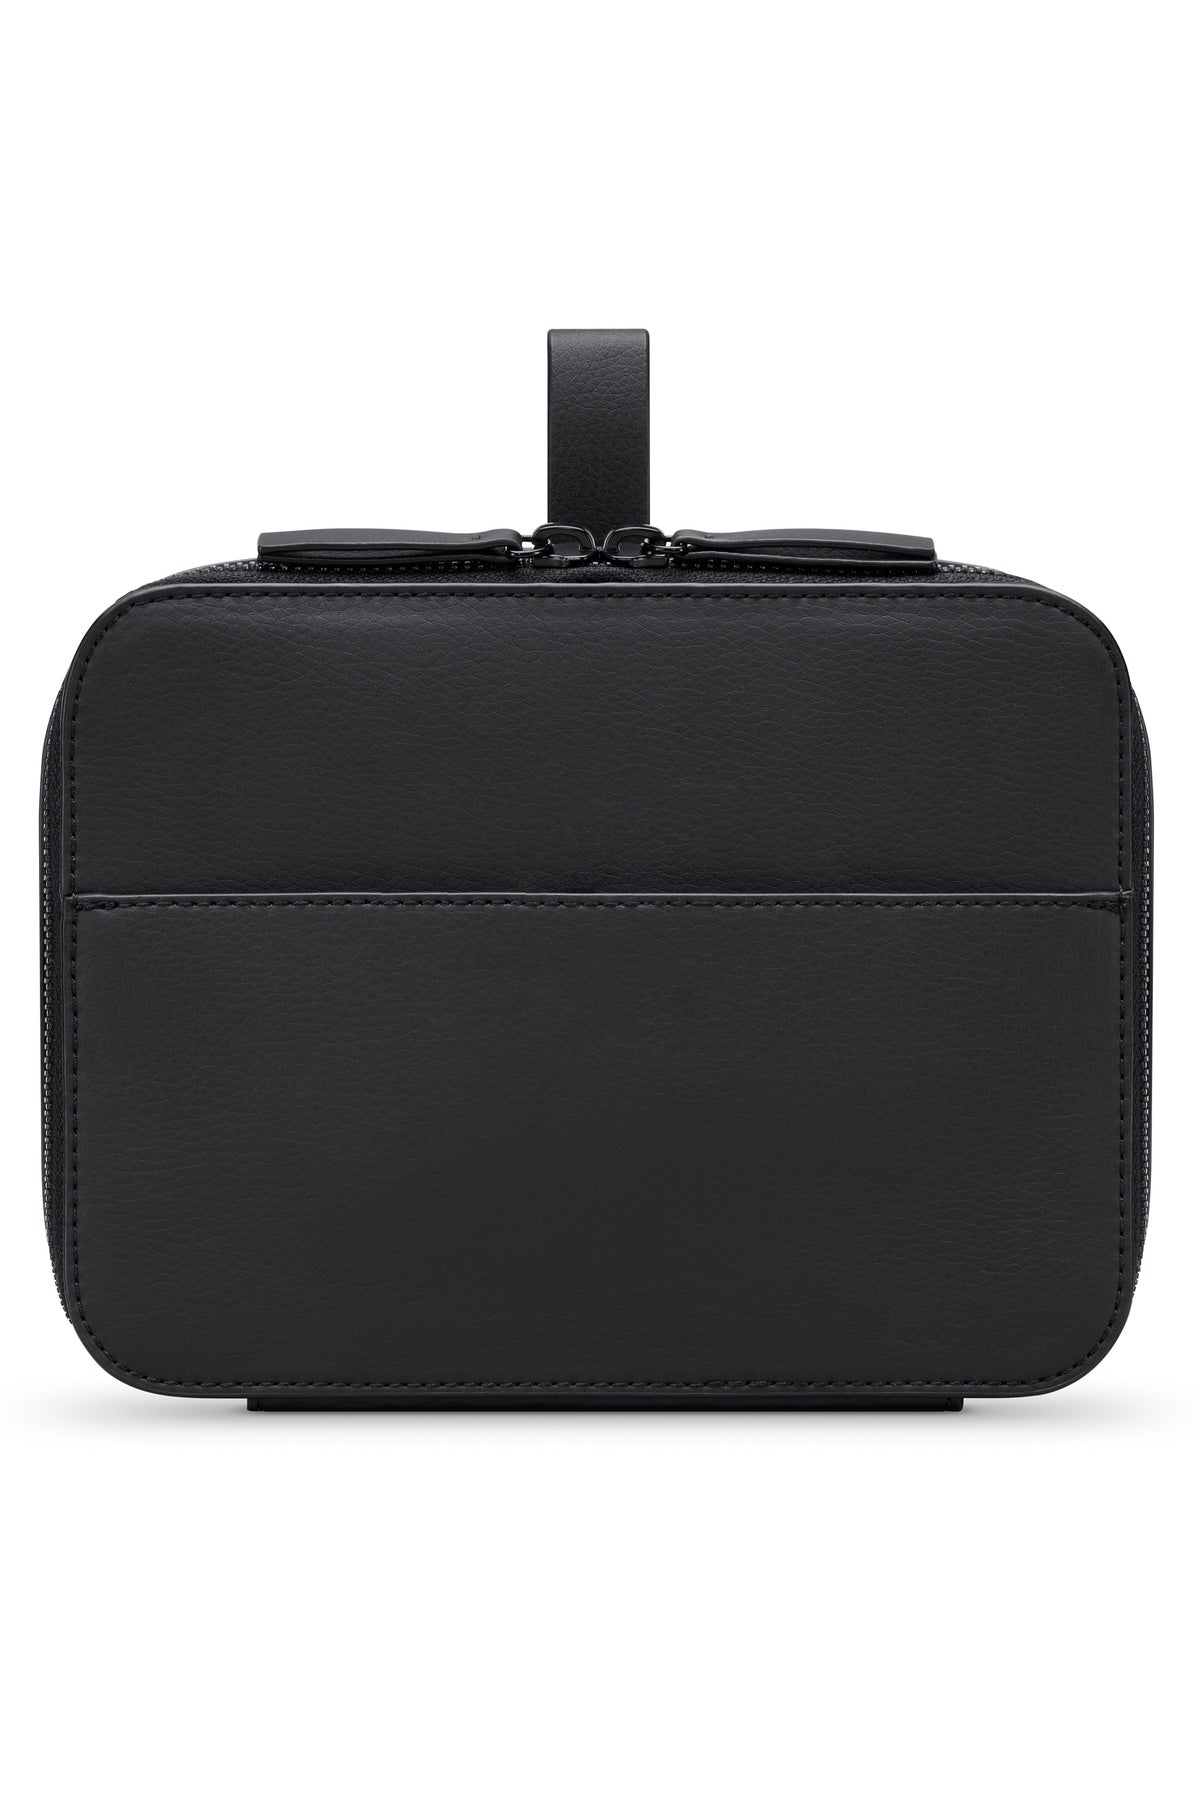 Monos: The Clean, Pristine, Sophisticated “Apple of Suitcases” - Yanko  Design | Luggage, Travel luggage, Suitcase